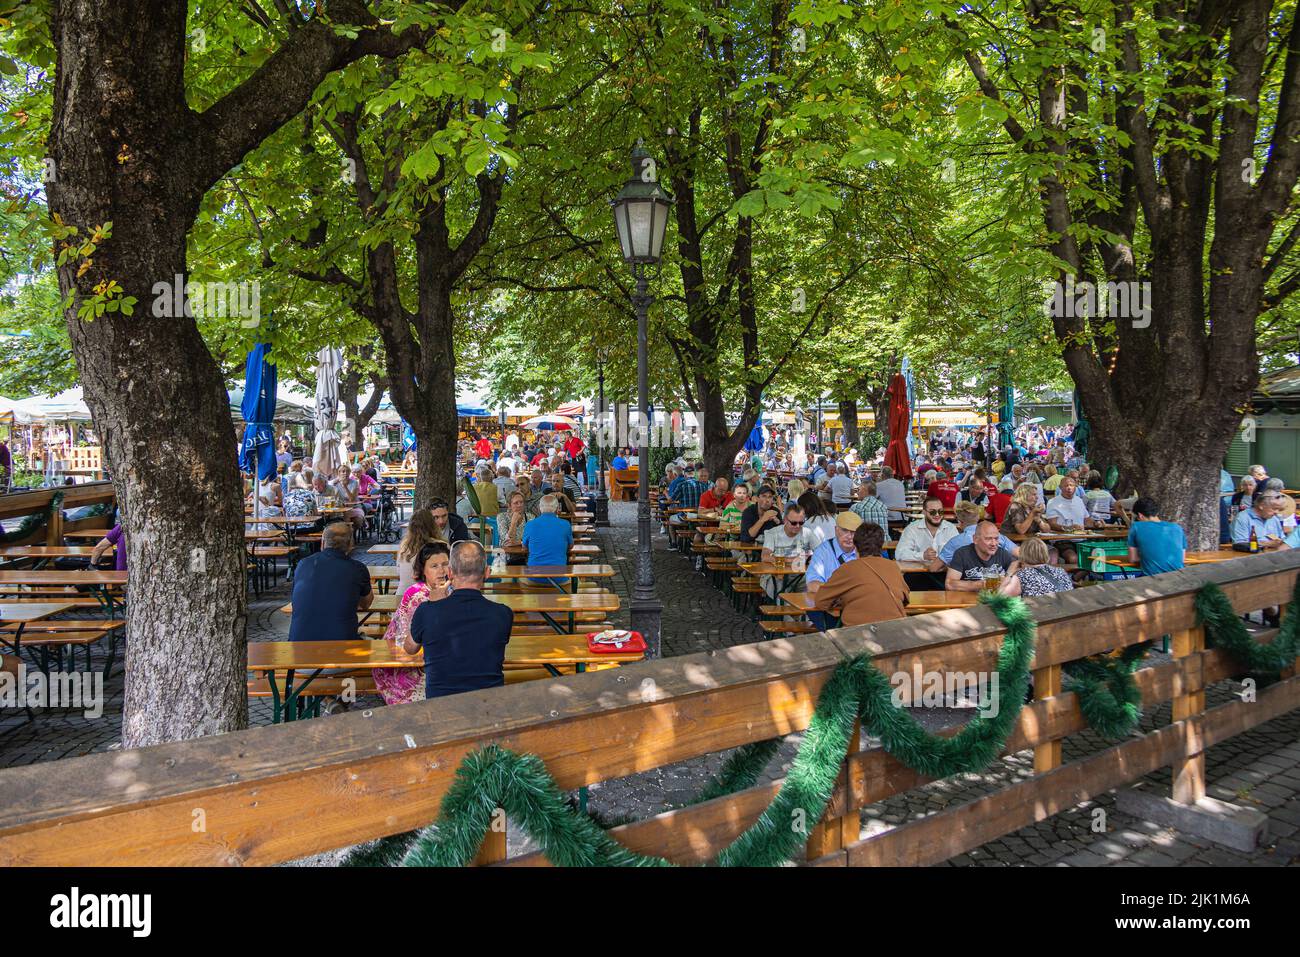 Munich, Germany - July 6, 2022: Beer garden on the viktualienmarkt at lunch time. Locals and tourist relaxing on a summer day under the shady trees an Stock Photo